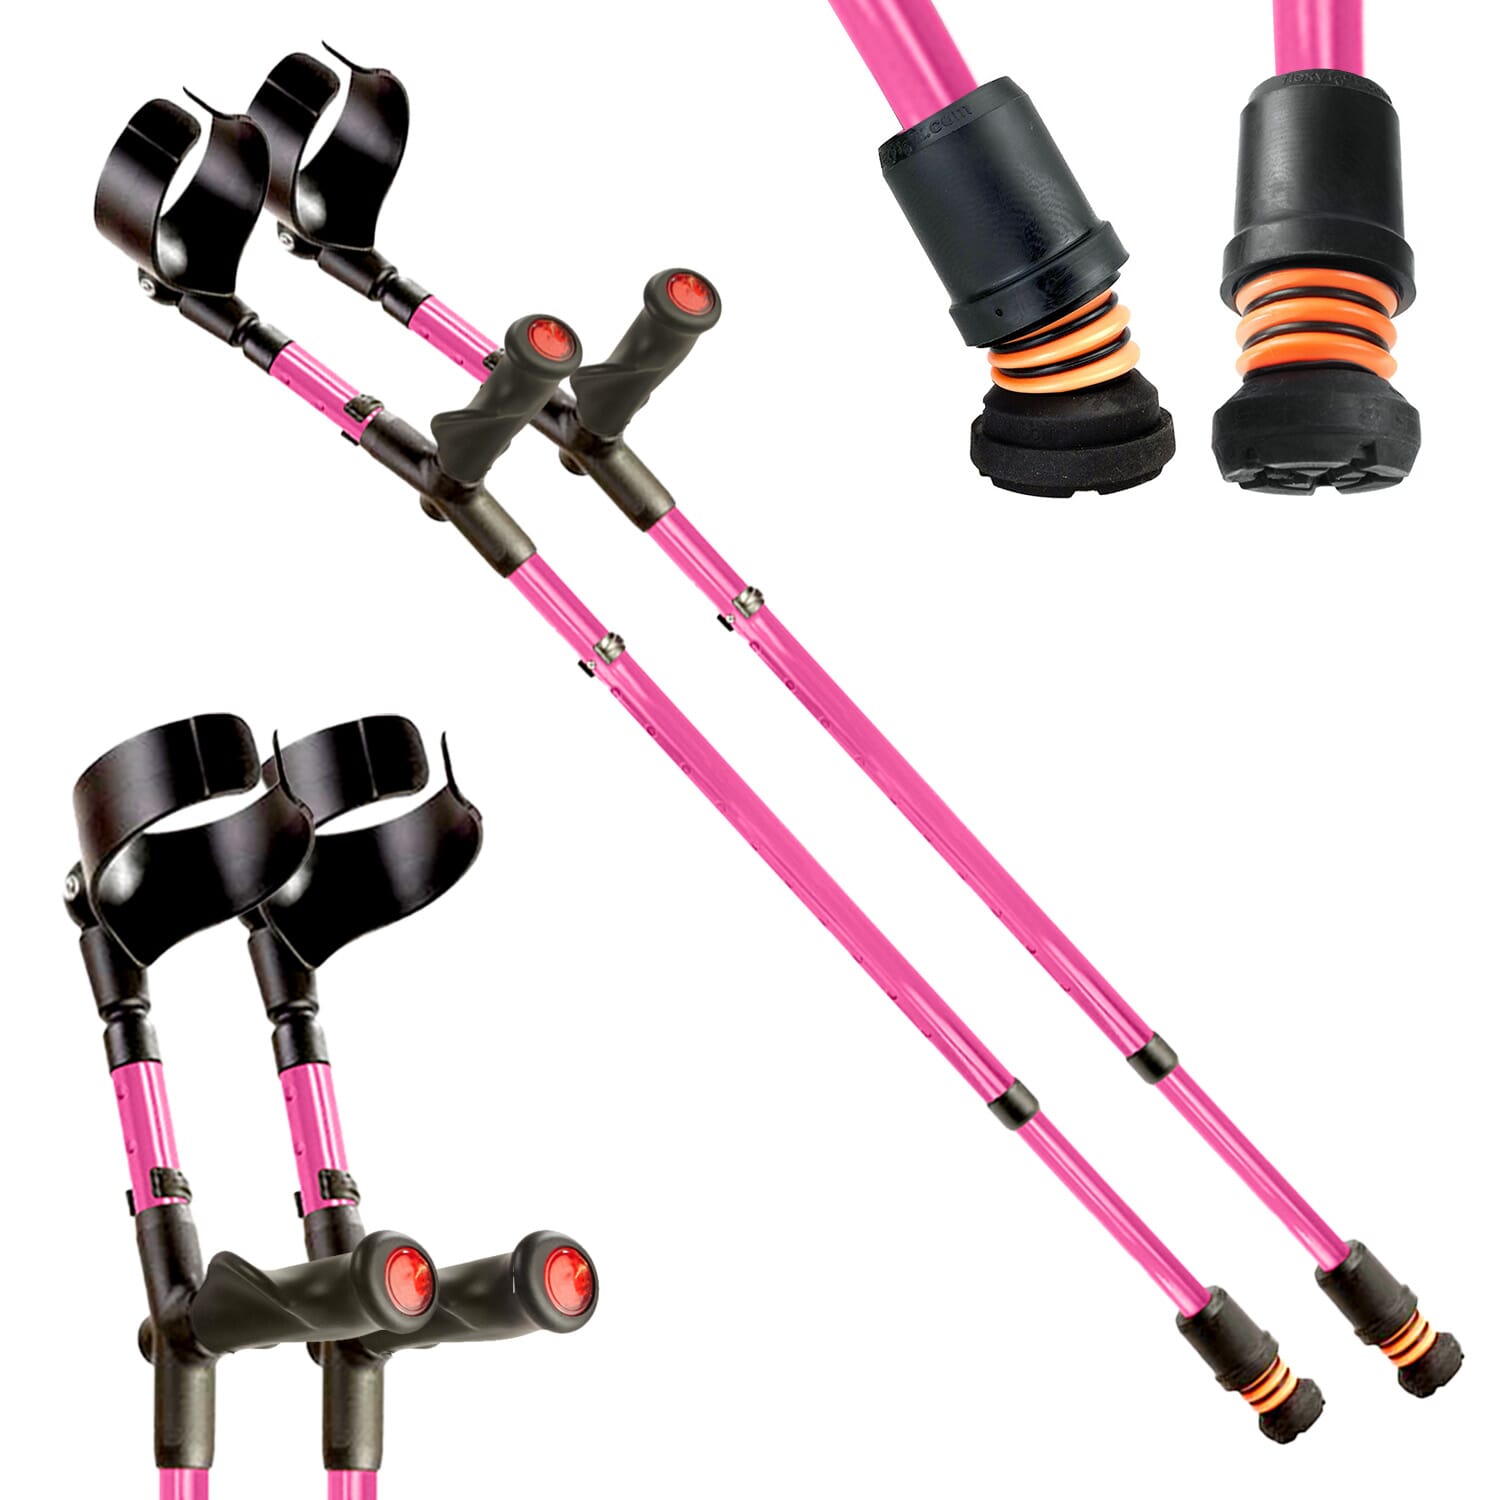 View Flexyfoot Comfort Grip Double Adjustable Crutches Pink Pair information